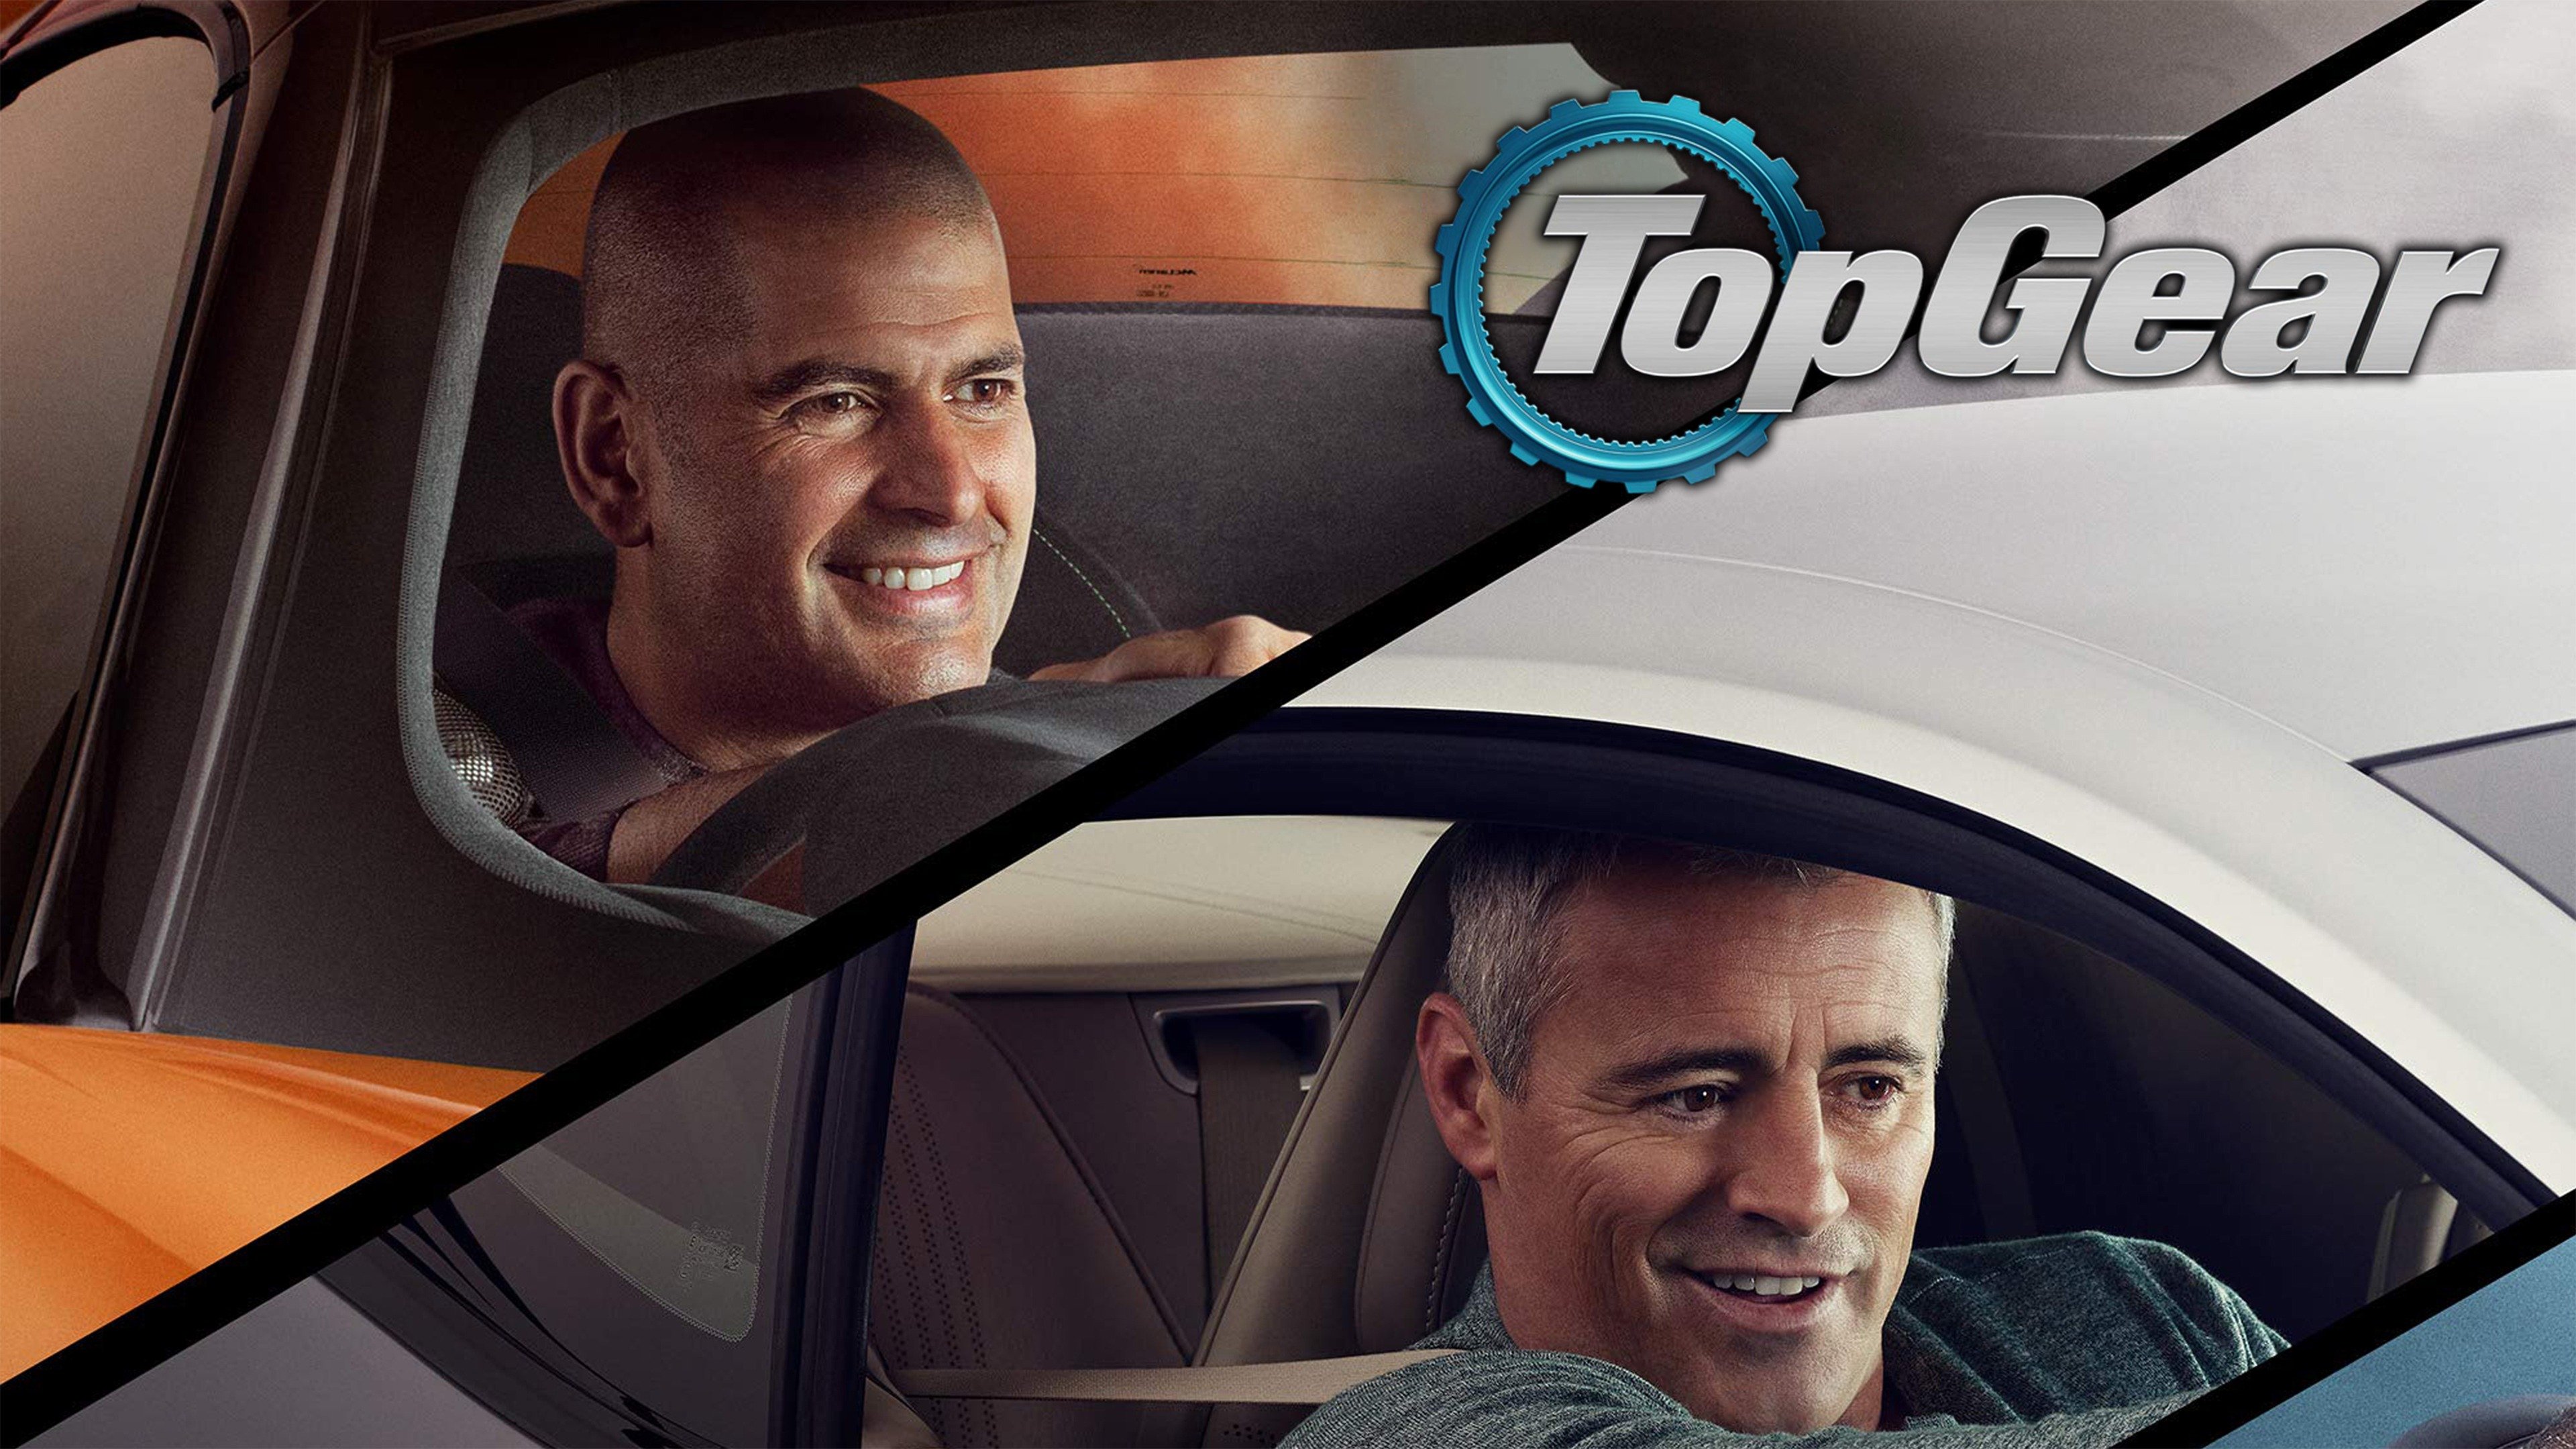 Prelude Serrated ungdomskriminalitet Top Gear - Rotten Tomatoes